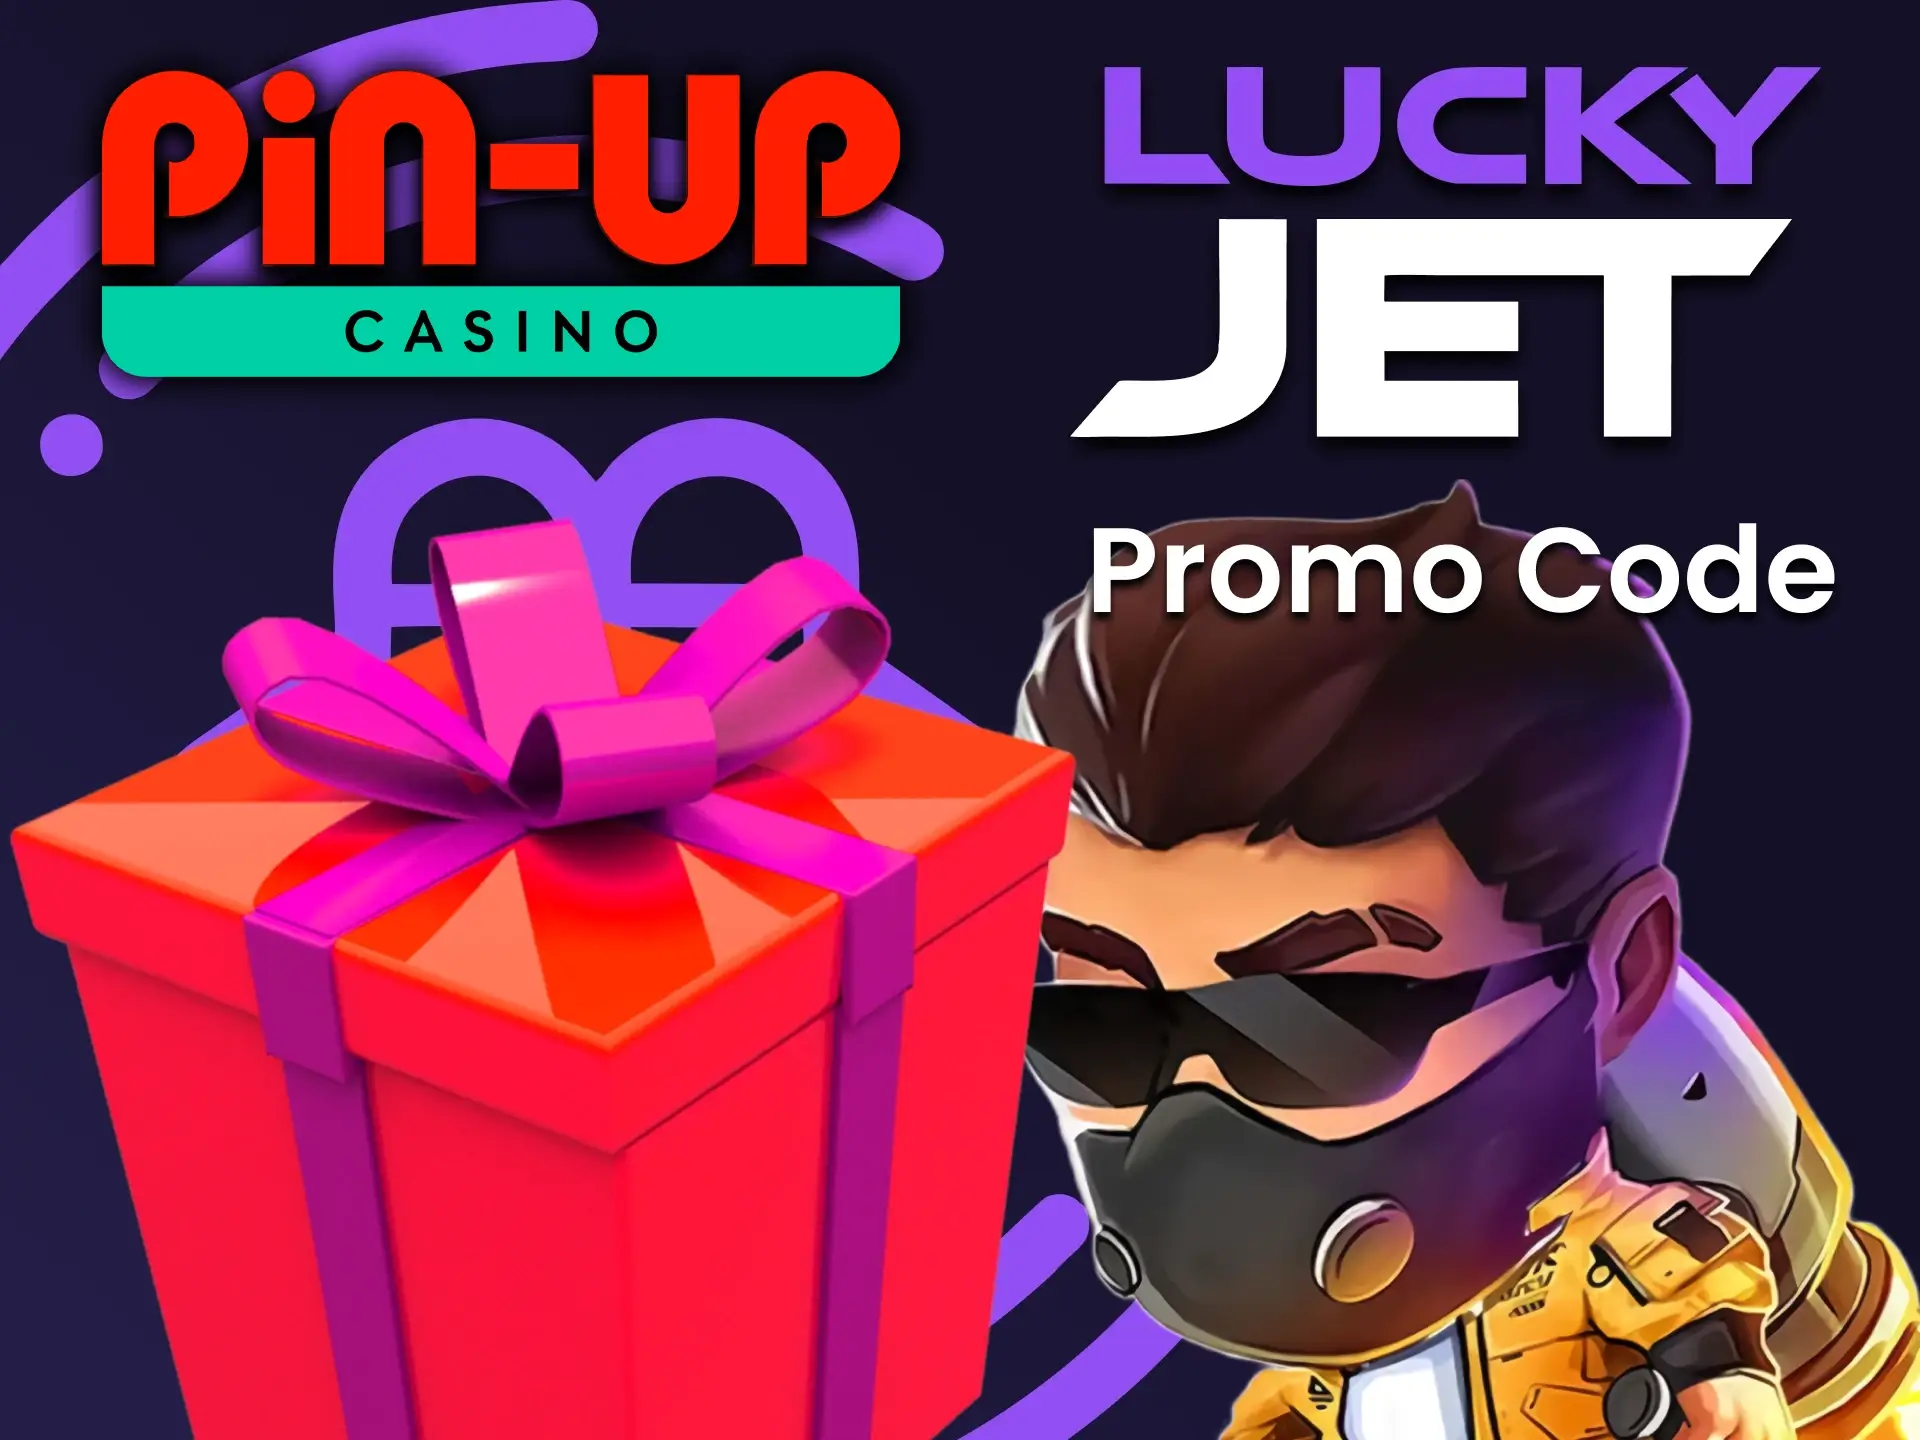 Enter the Pin Up Propo Code to play Lucky Jet.